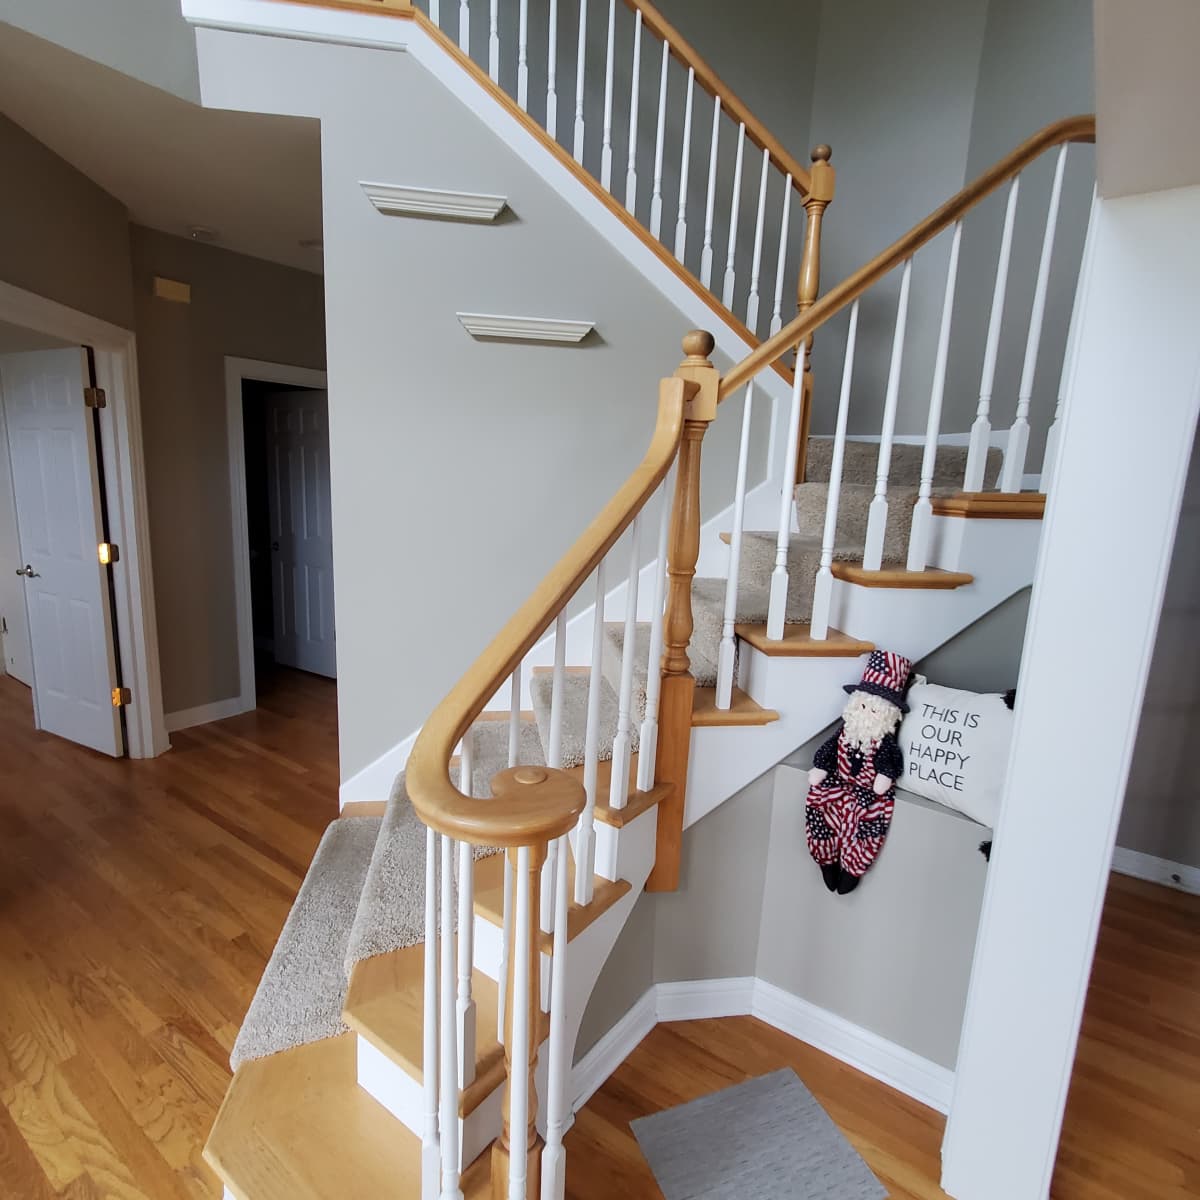 Best Paint for Stairs in a Basement